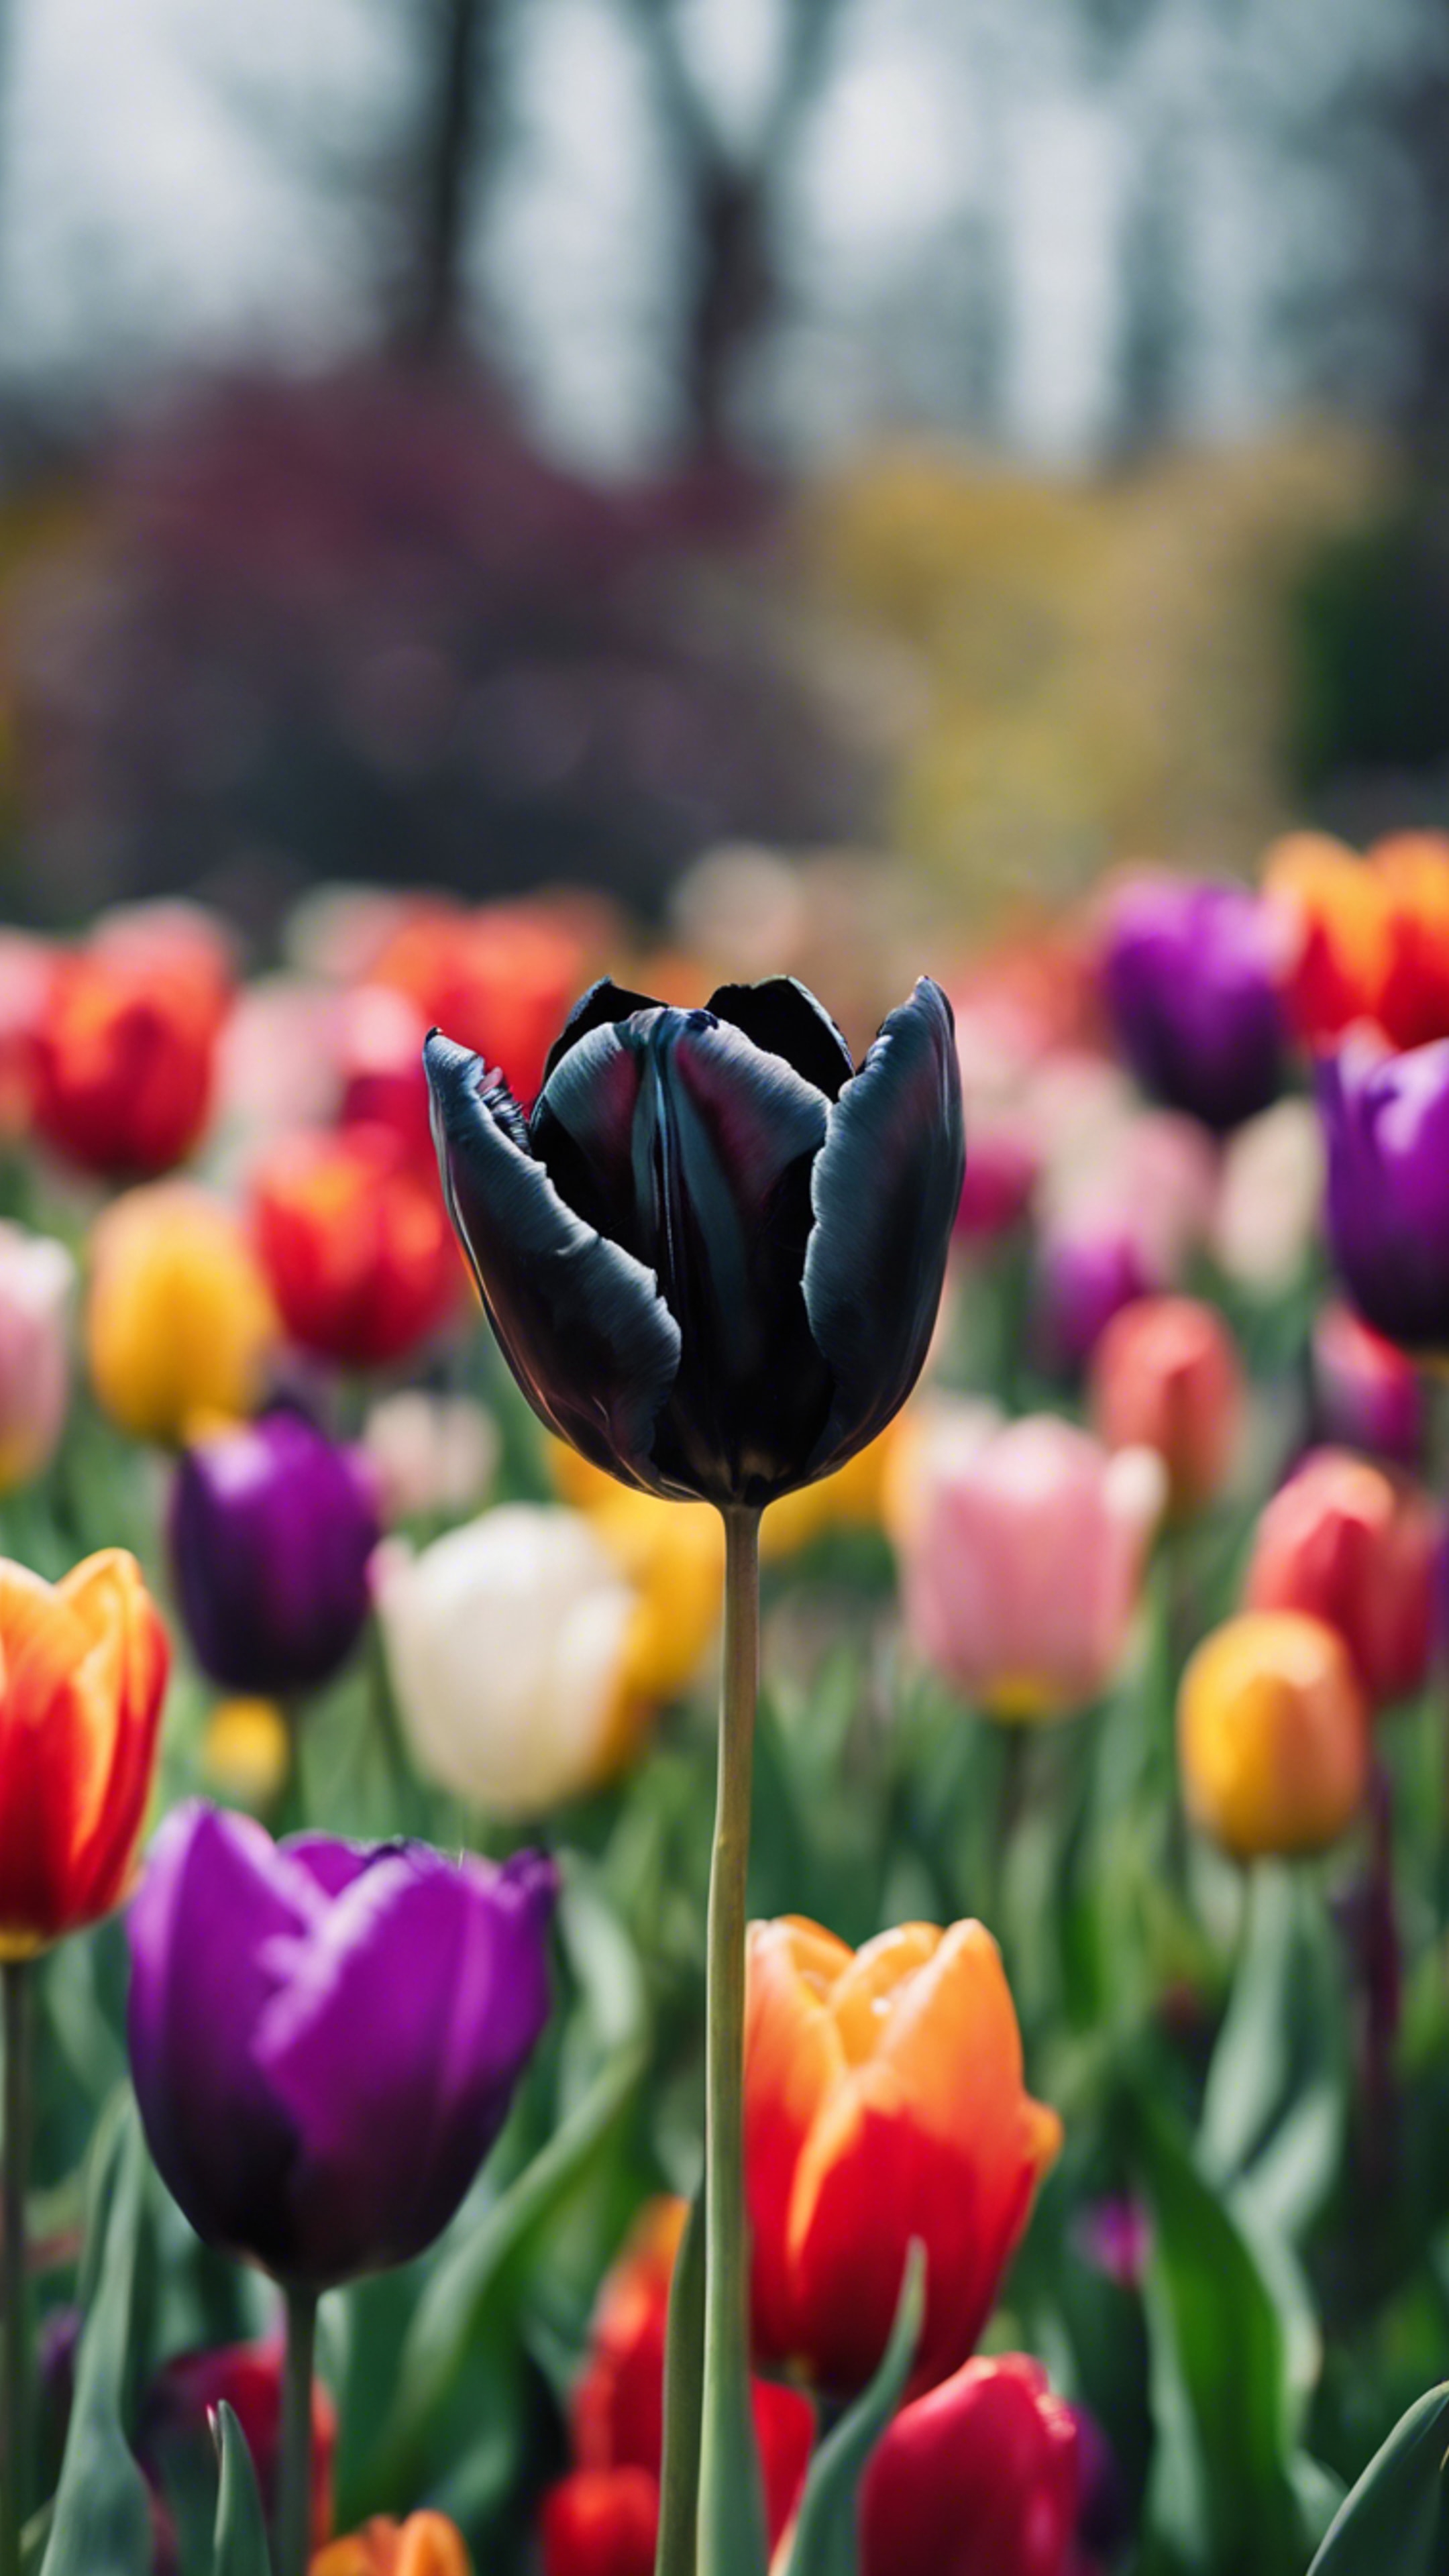 A delicate black tulip, standing out dramatically among a vibrant spray of multicolored tulips in a spring garden.壁紙[60dfa6a8a46243228945]